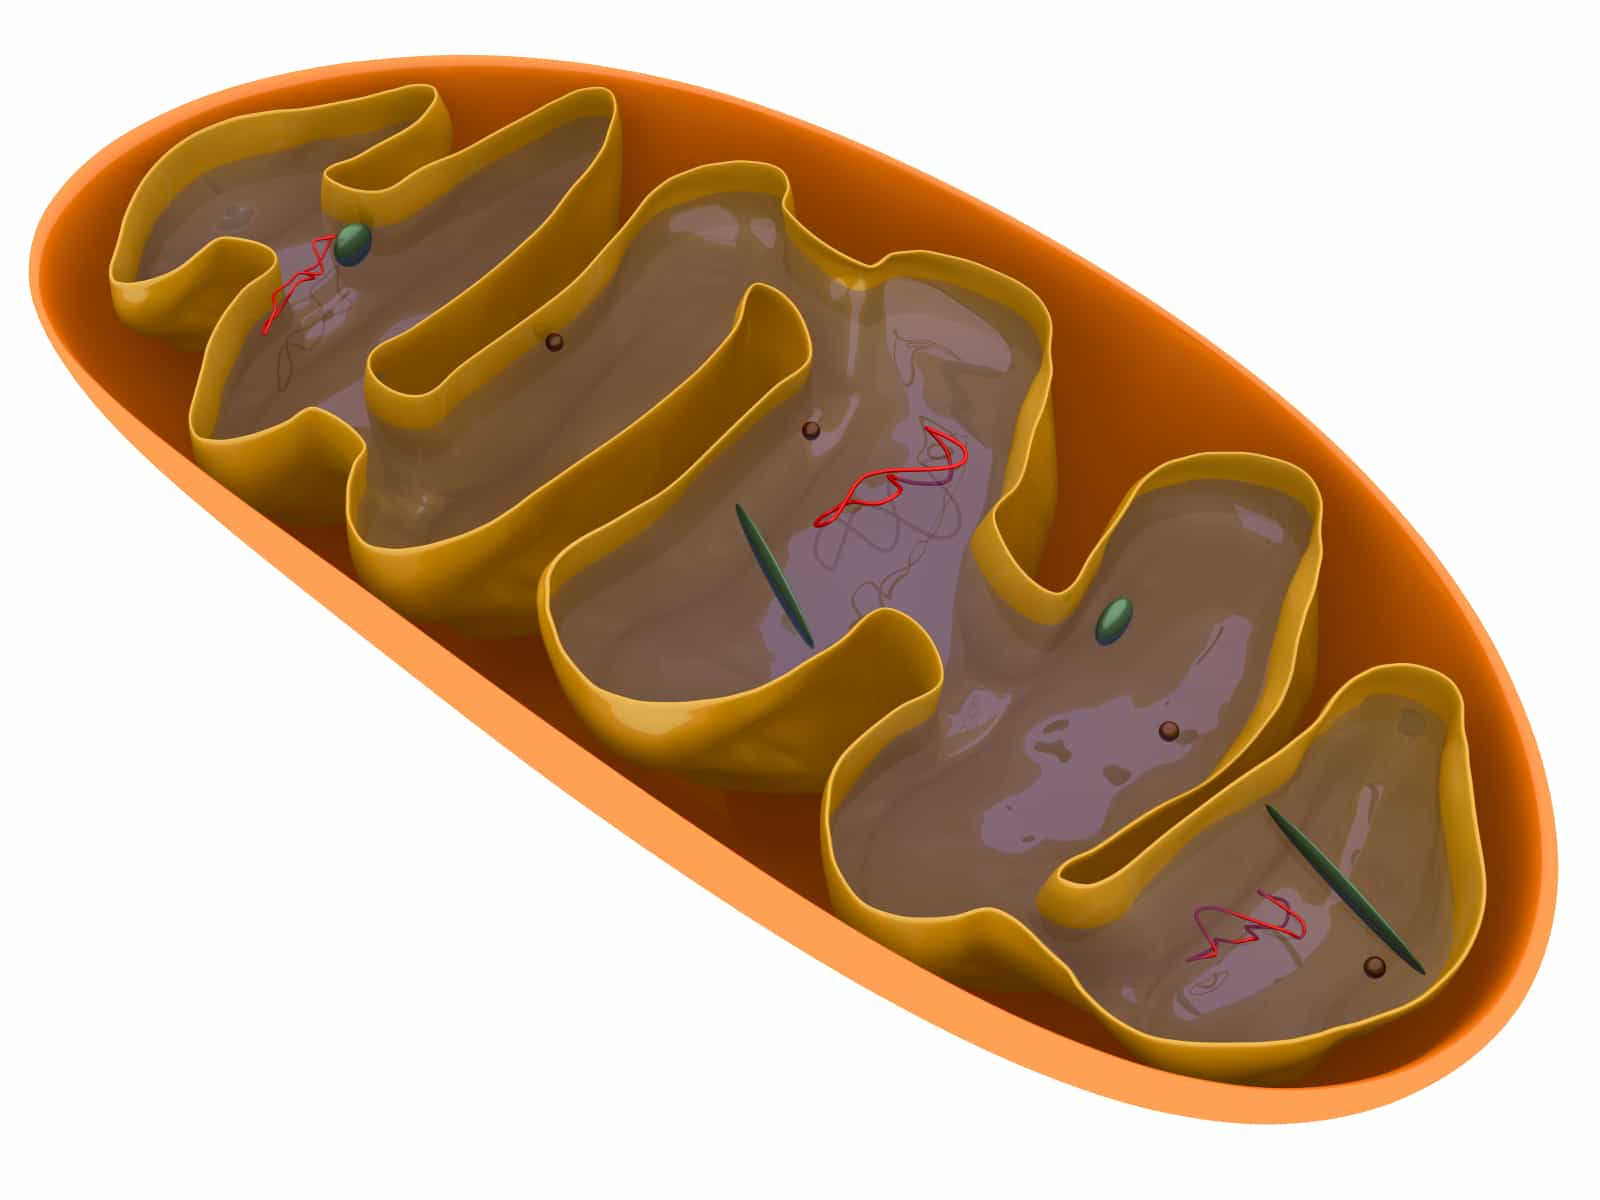 a 3D cross-section render of a mitochondrion